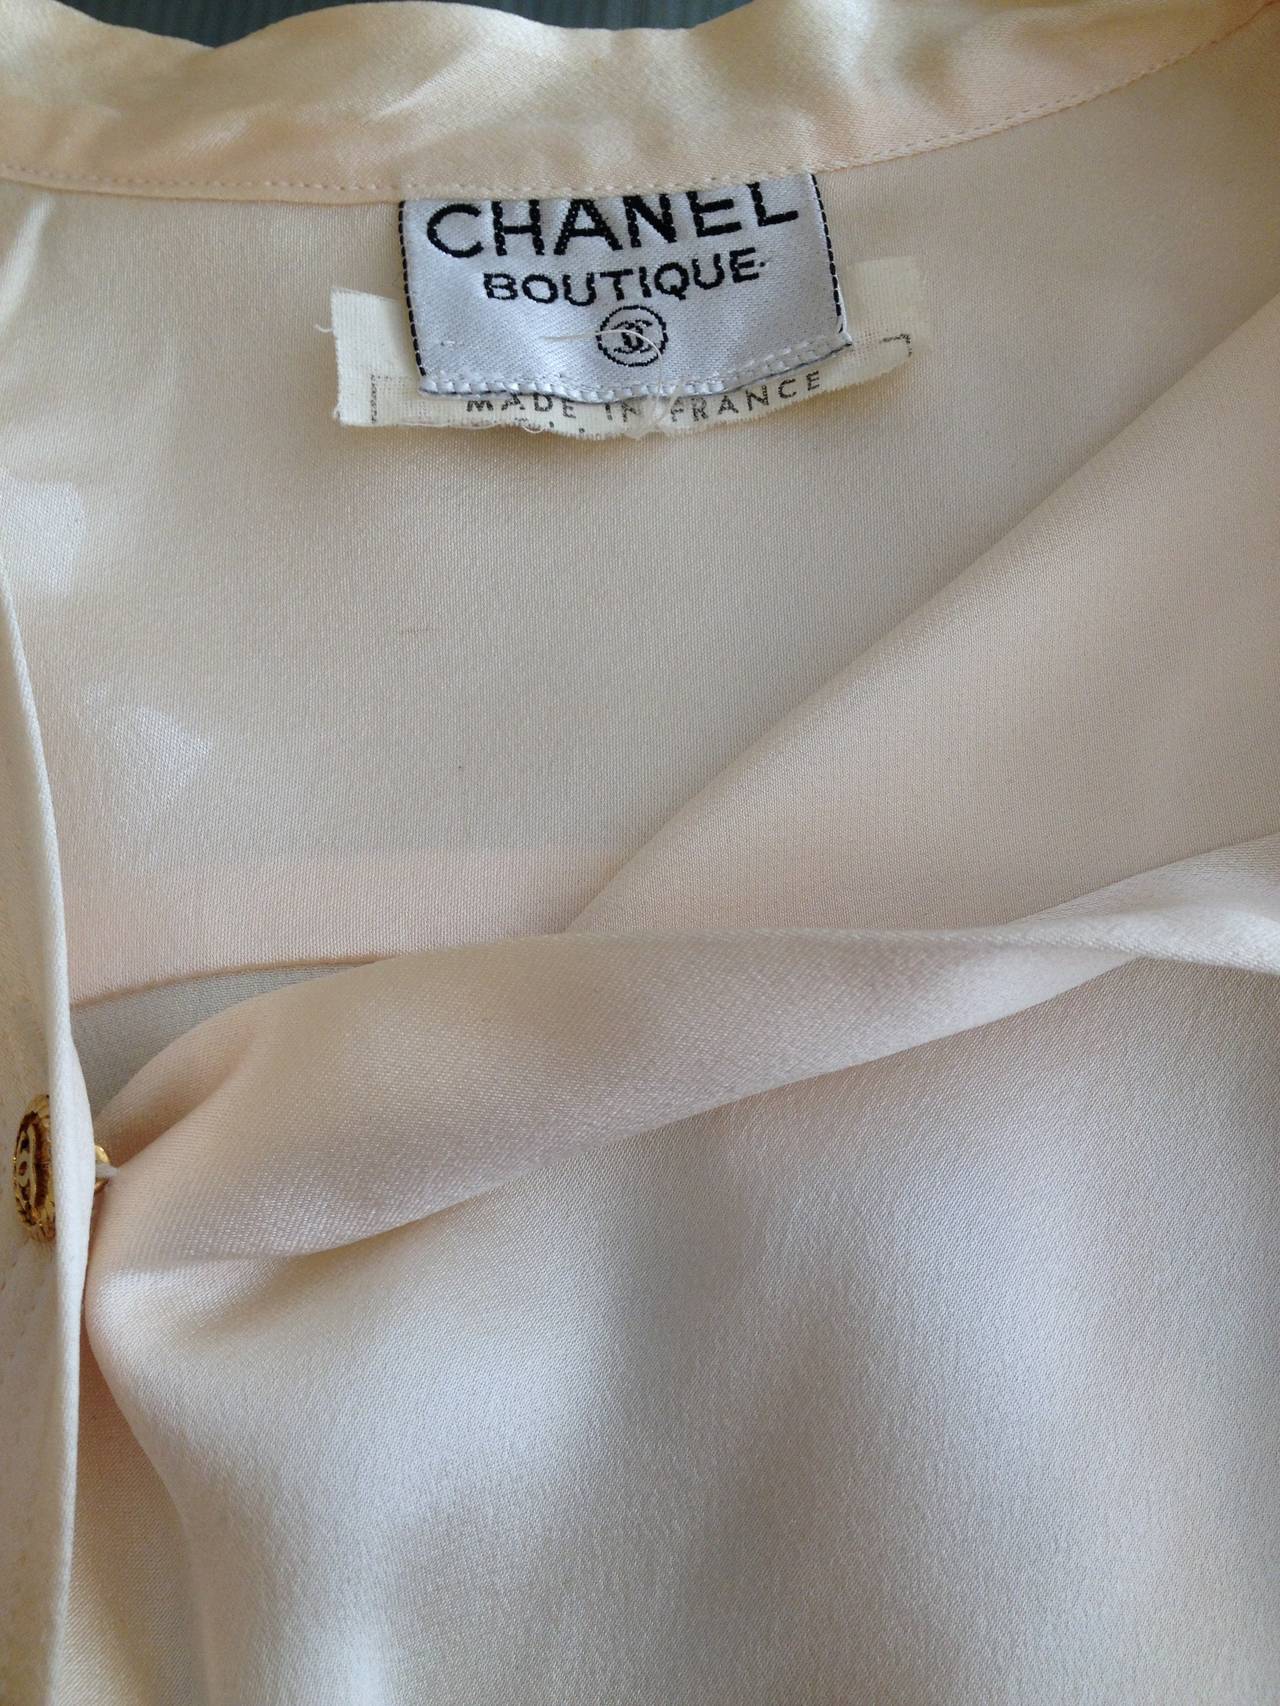 Chanel Vintage Cream Satin Blouse with Bow Tie 1